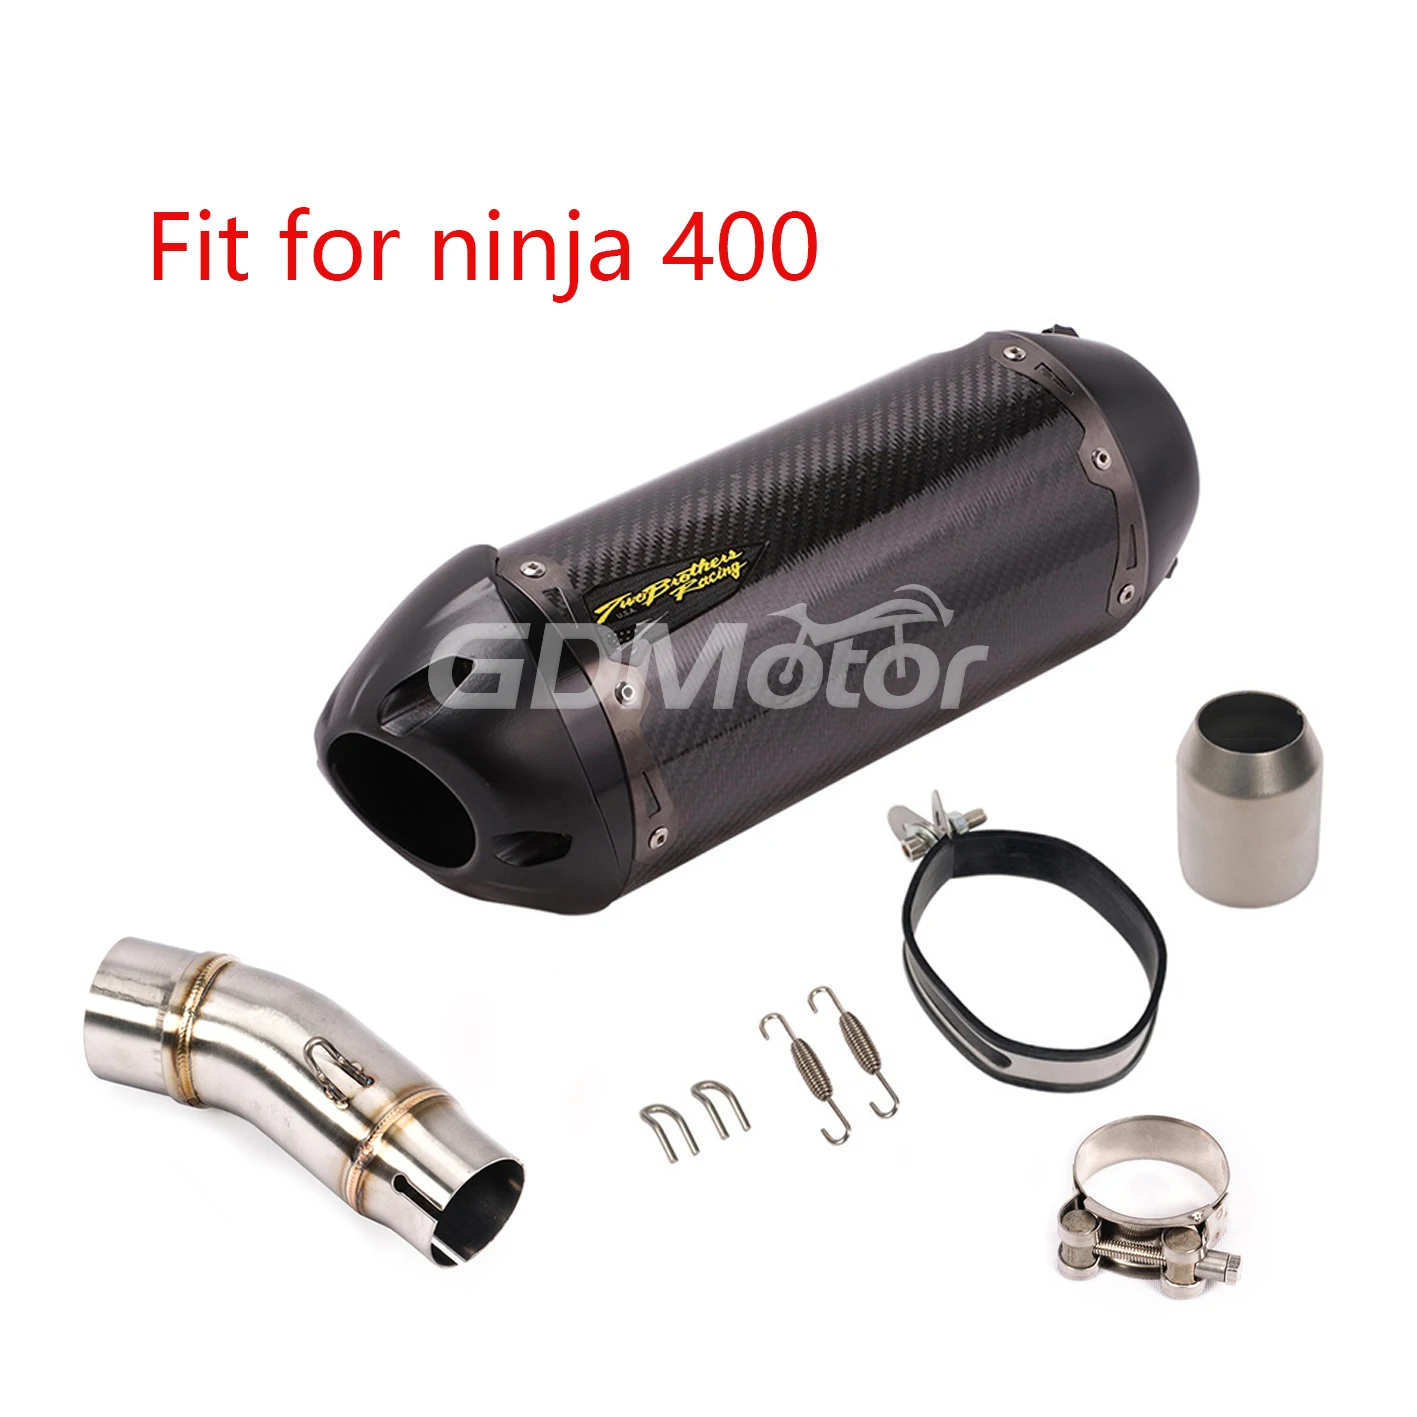 

For Ninja 400 Slip-on Exhaust Middle Pipe connect with two brotherss Muffler Escape Moto For Kawasaki Z400 Ninja400 2018 2019